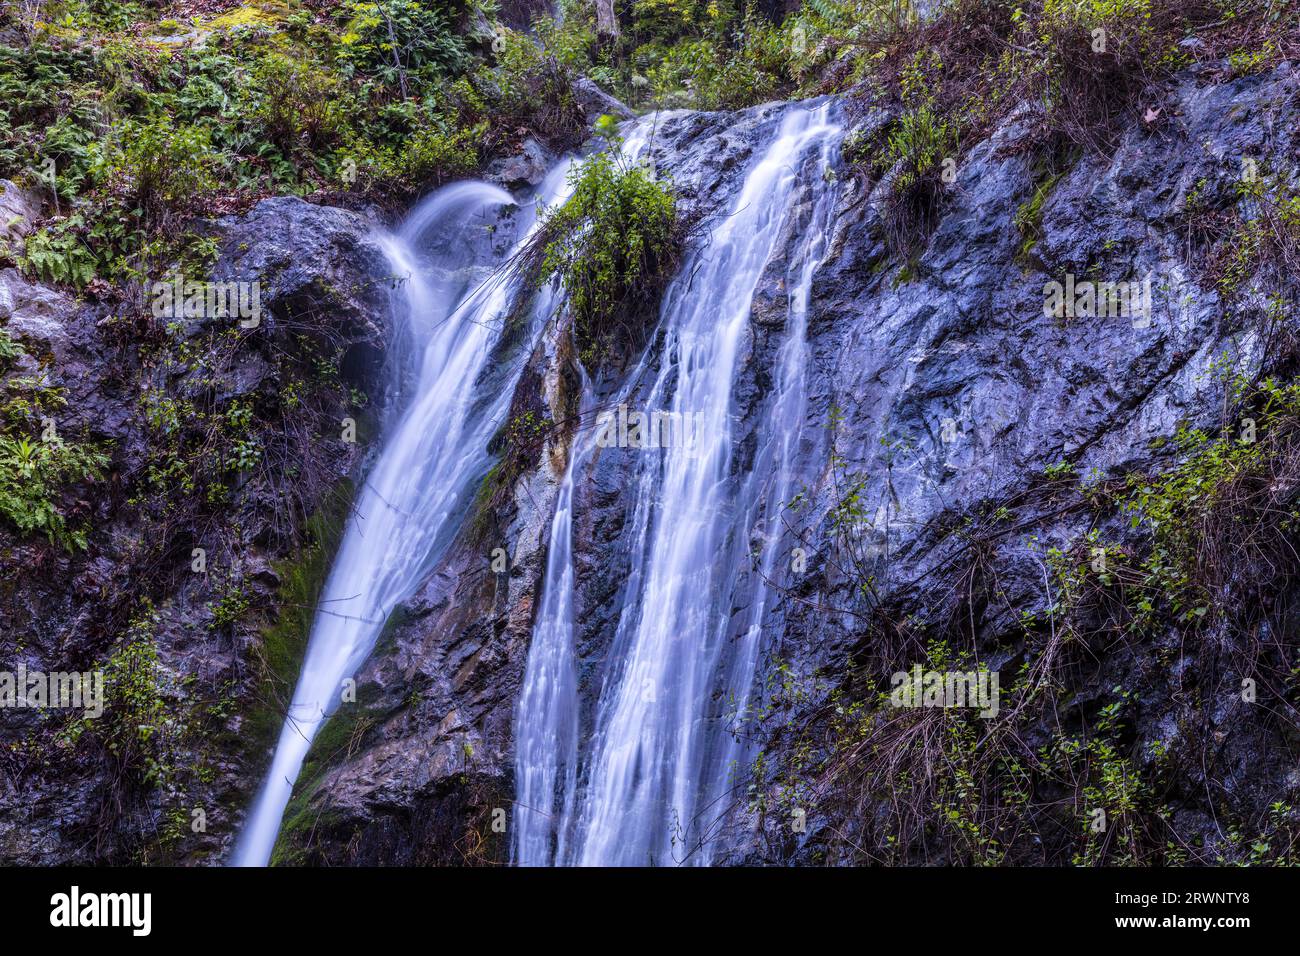 Closeup of Pfeiffer Falls, in Pfeiffer Big Sur State Park. Green vegetation clinging to the rocky face. Stock Photo